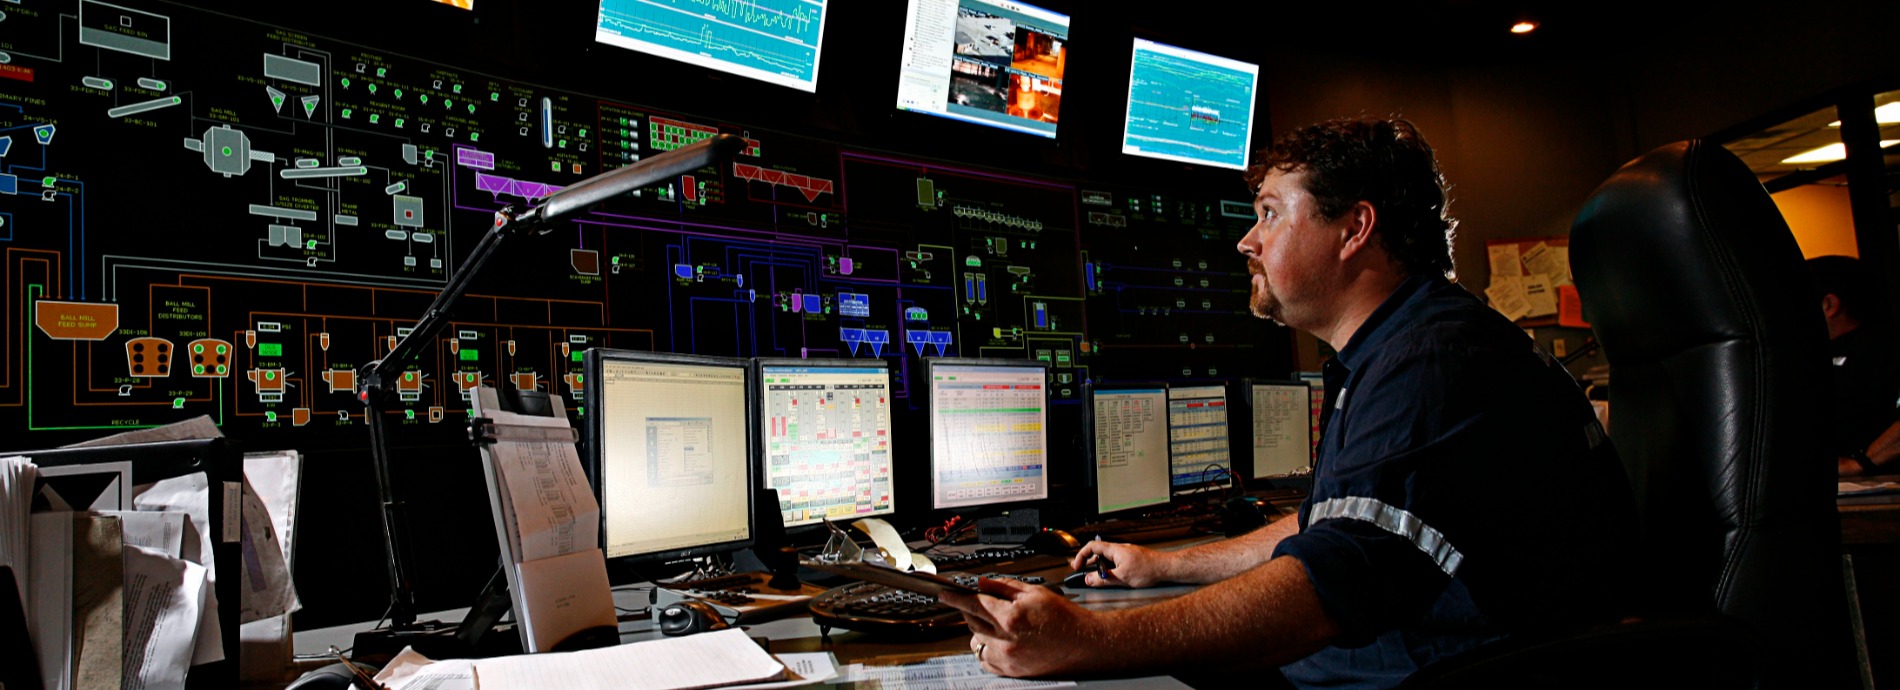 male mine operator looking at row of screens